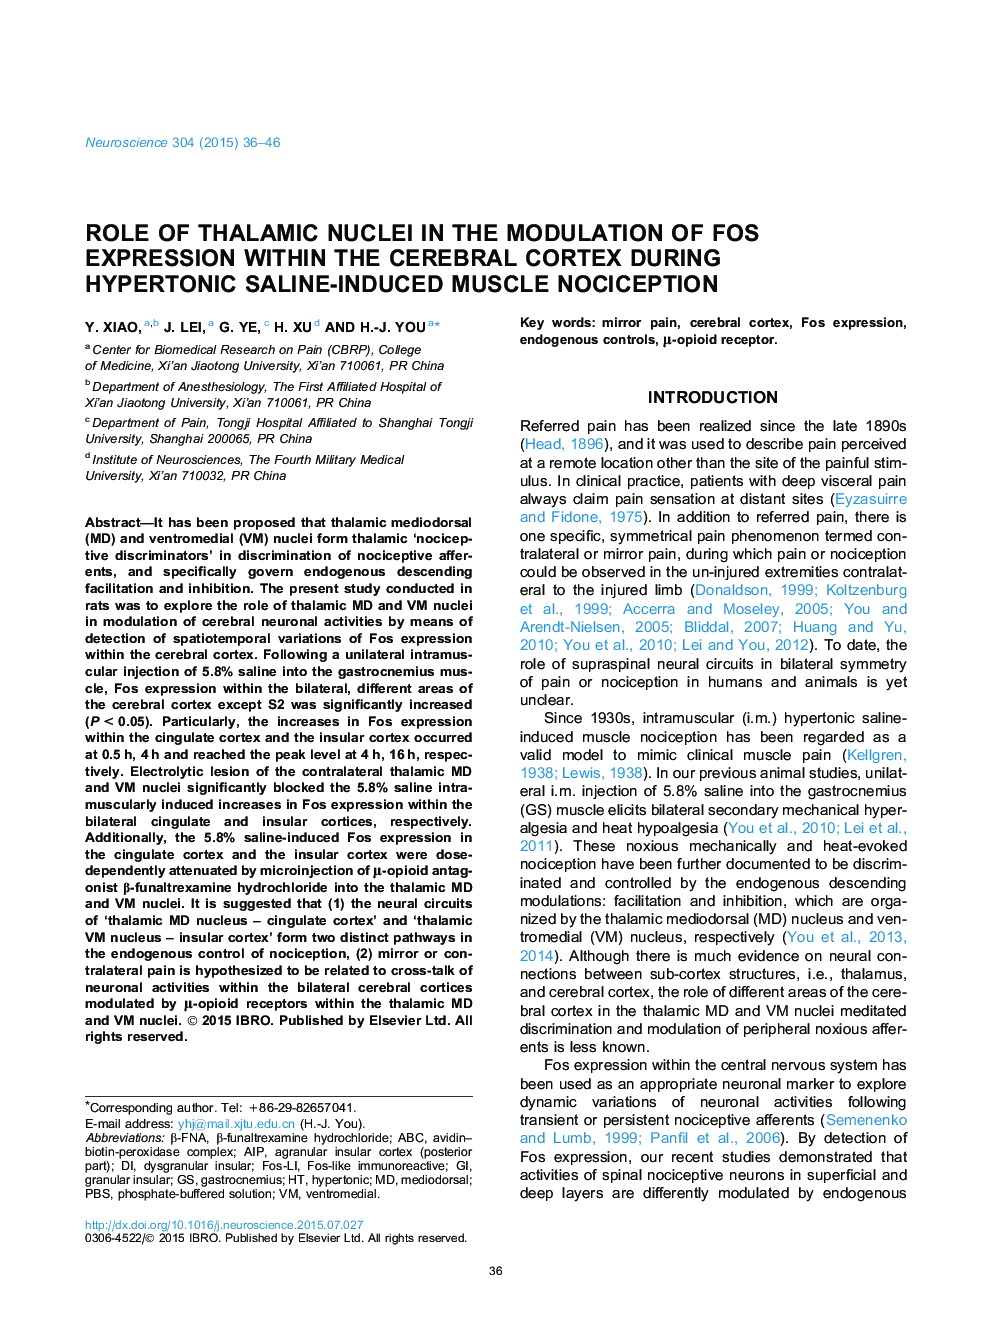 Role of thalamic nuclei in the modulation of Fos expression within the cerebral cortex during hypertonic saline-induced muscle nociception